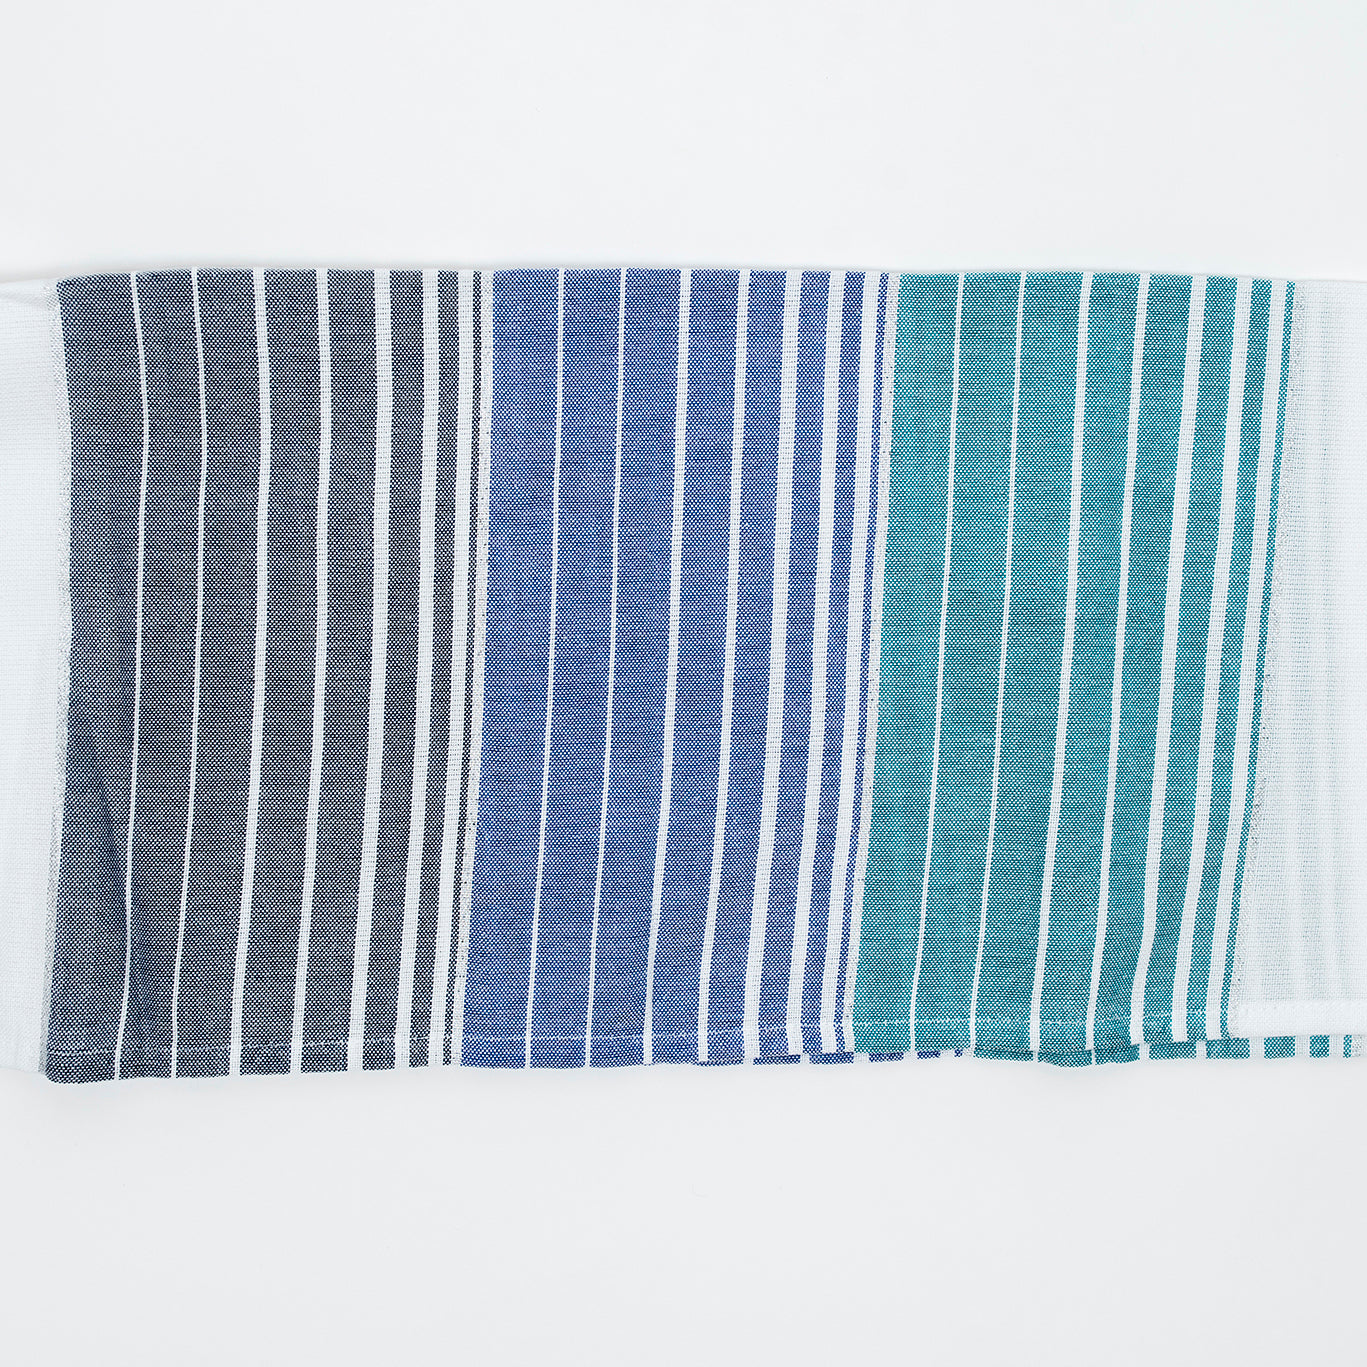 Ella - Cotton Tallit - Turquoise and Blue Stripes with Silver on White